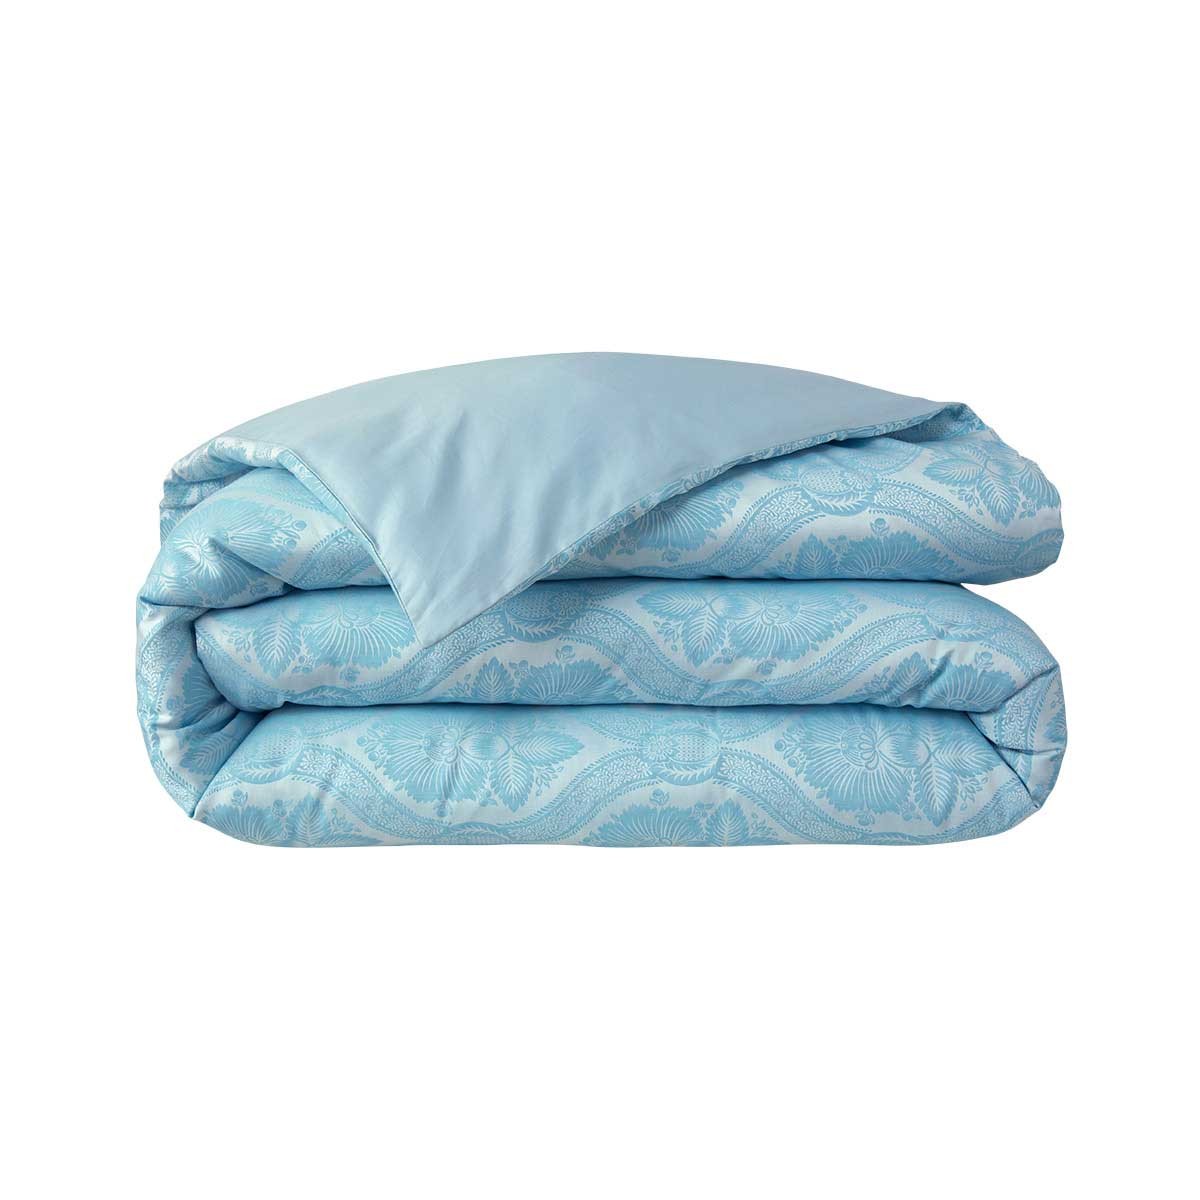 Yves Delorme Nil Collection | Bed Bleu Embrace Tranquility